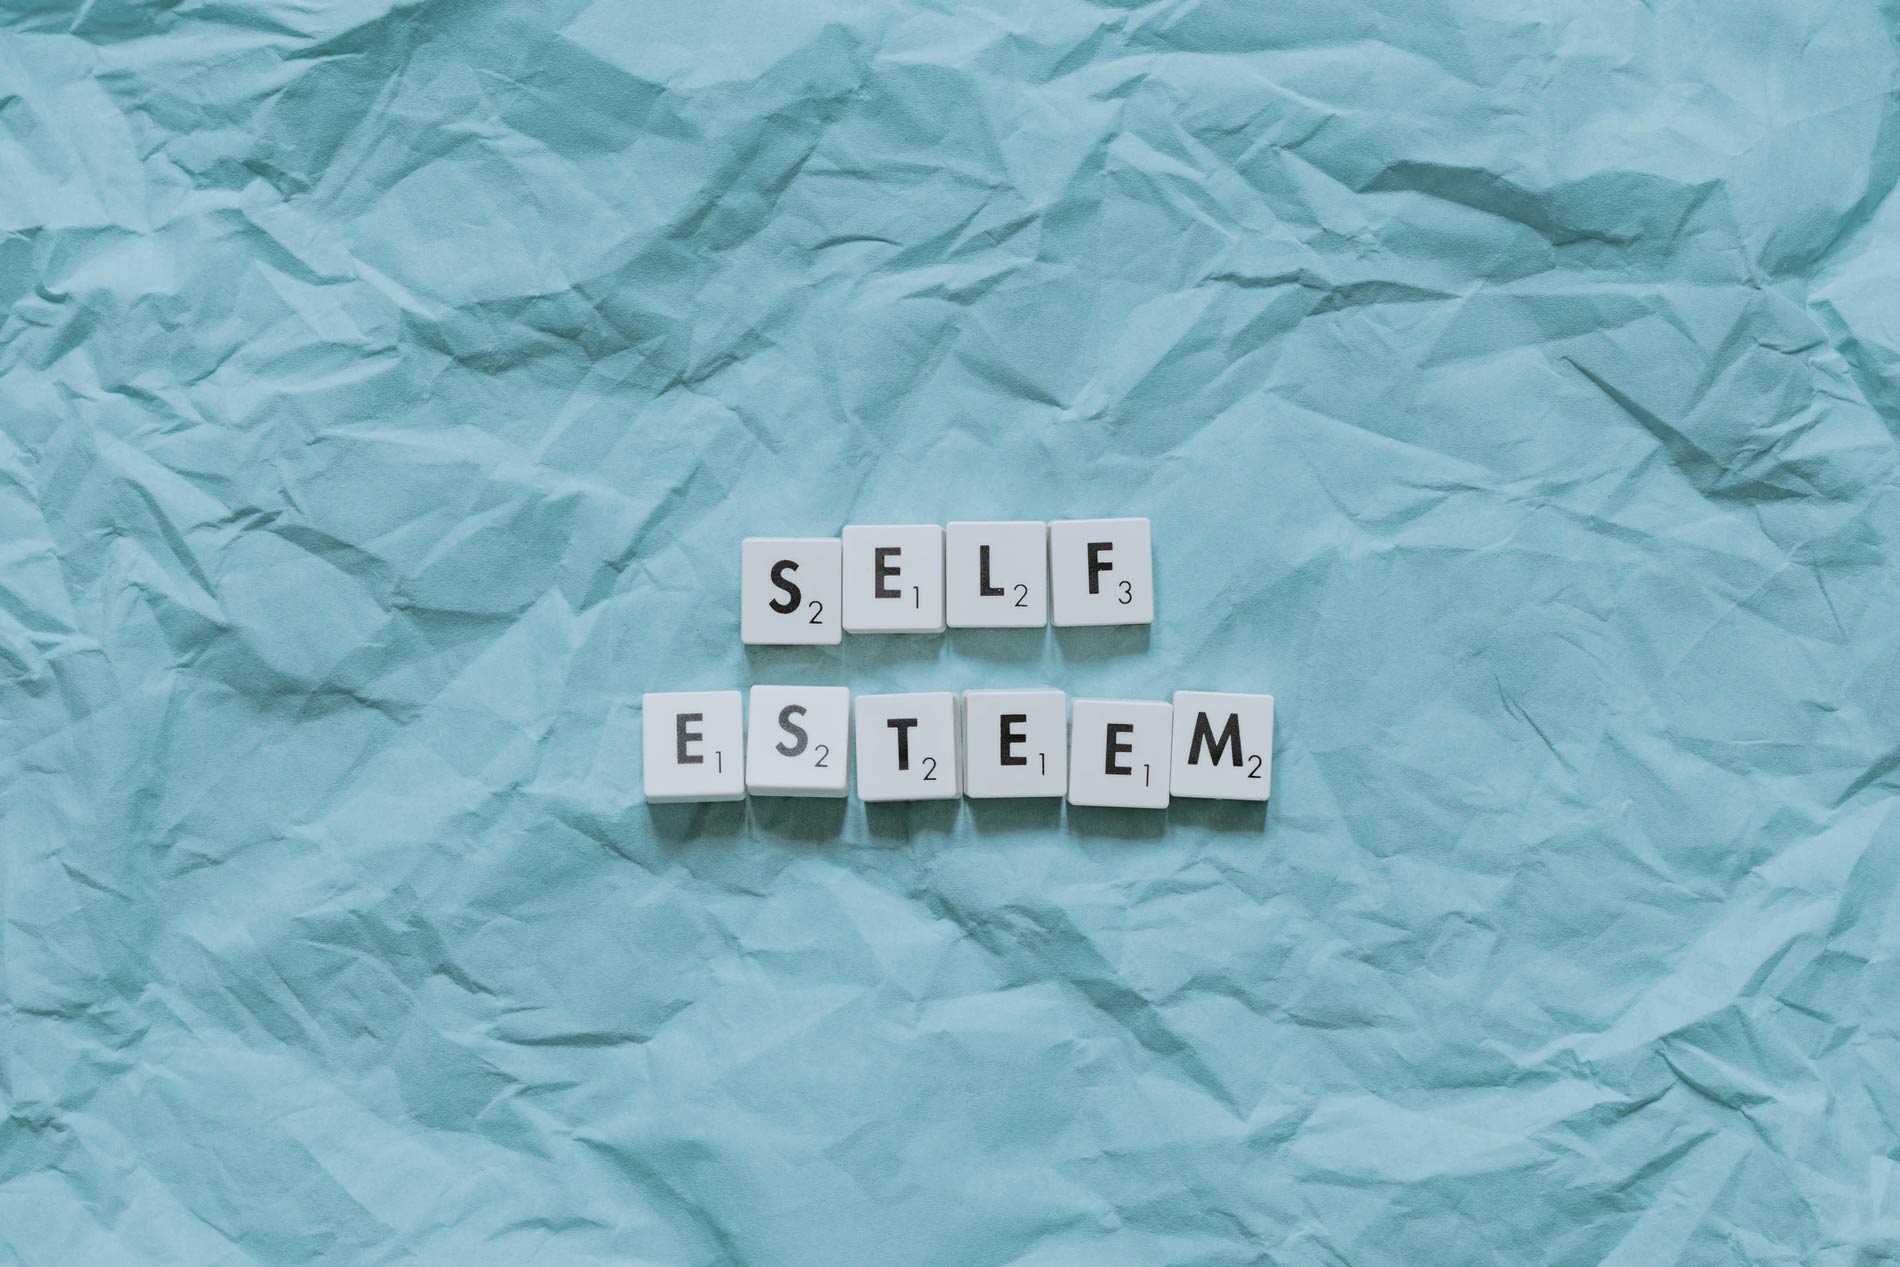 Is Self-Compassion More Important Than Self-Esteem? by Steven Hayes